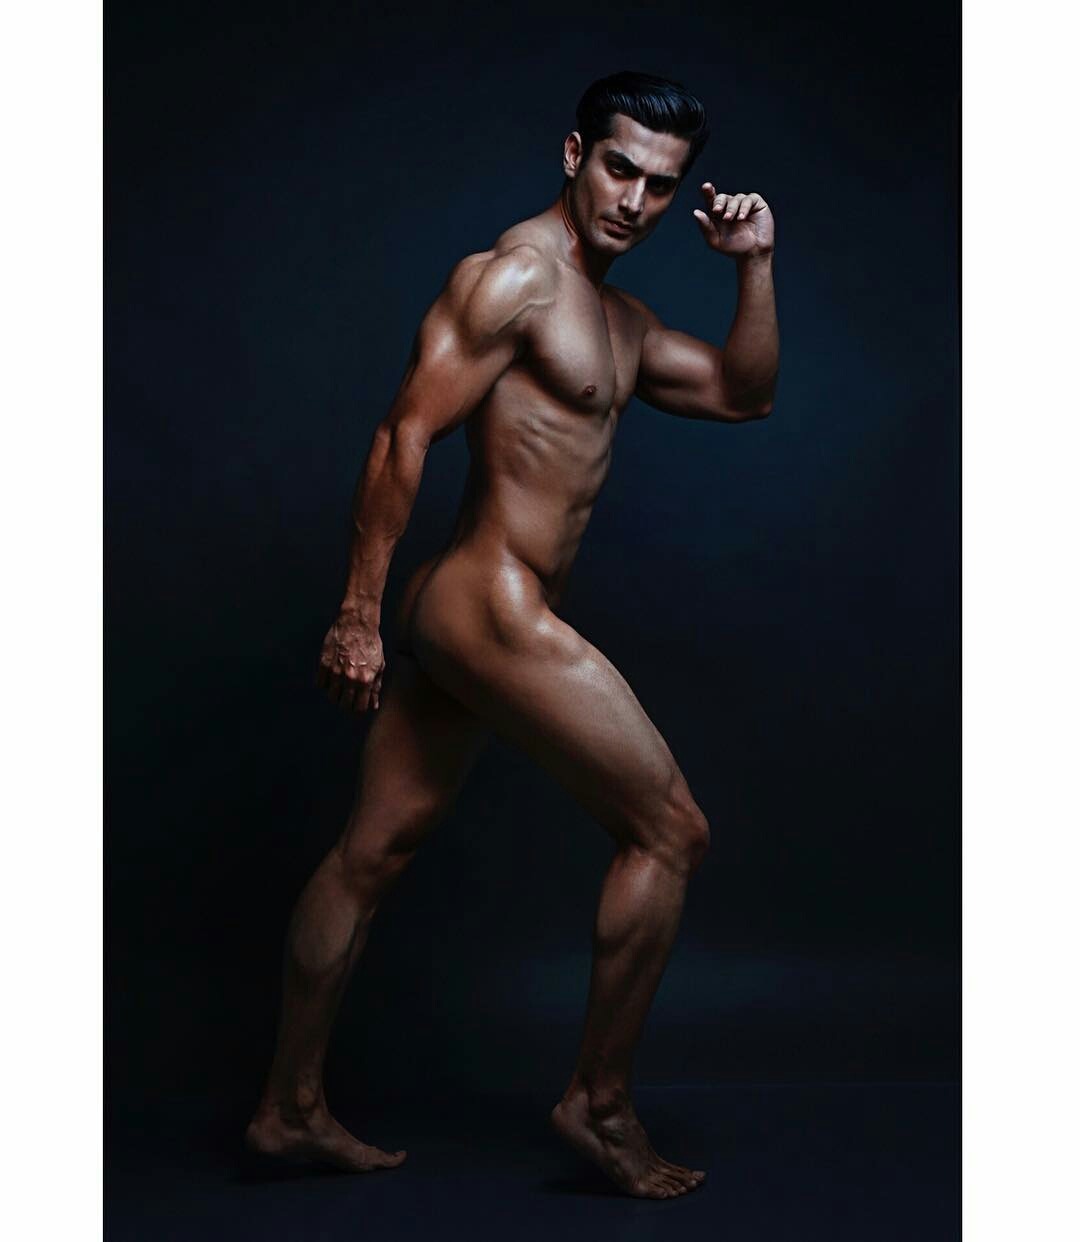 Indian Fitness Model Nude - Shirtless Bollywood Men: Naked Indian Male Models